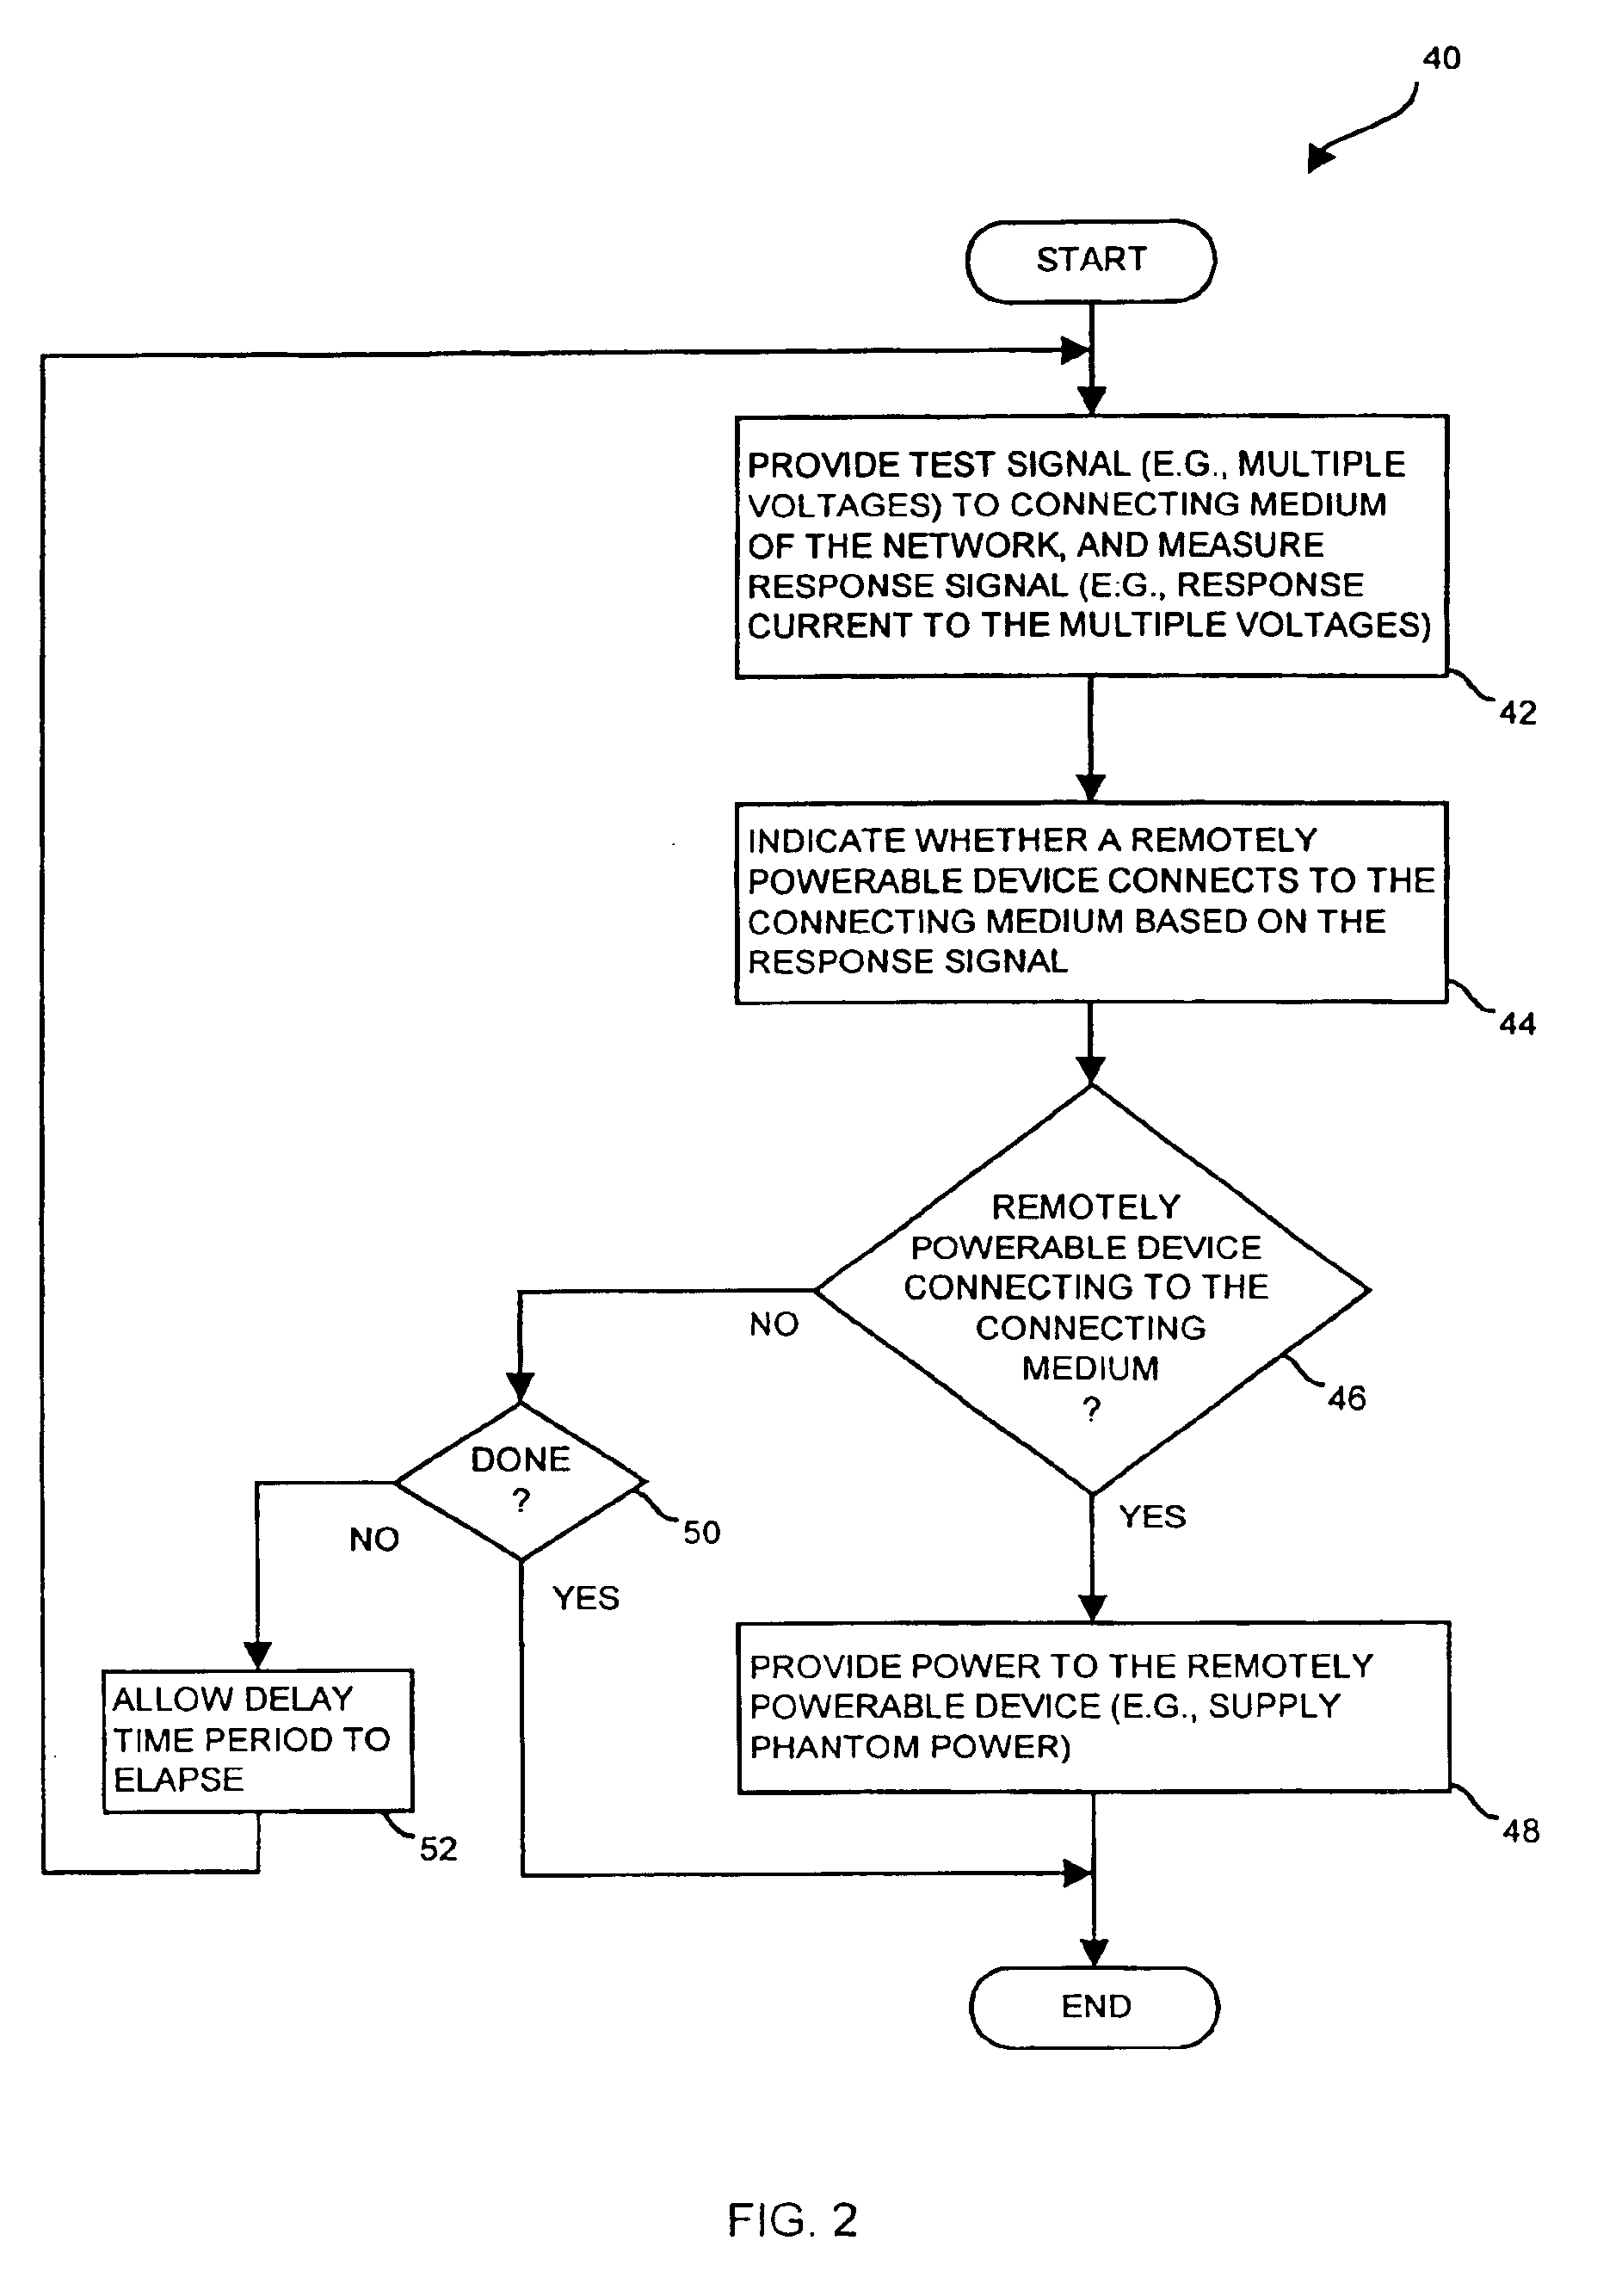 Remotely powerable device with powerability indicator for selectively indicating a backward wired device condition and a remotely powerable device condition